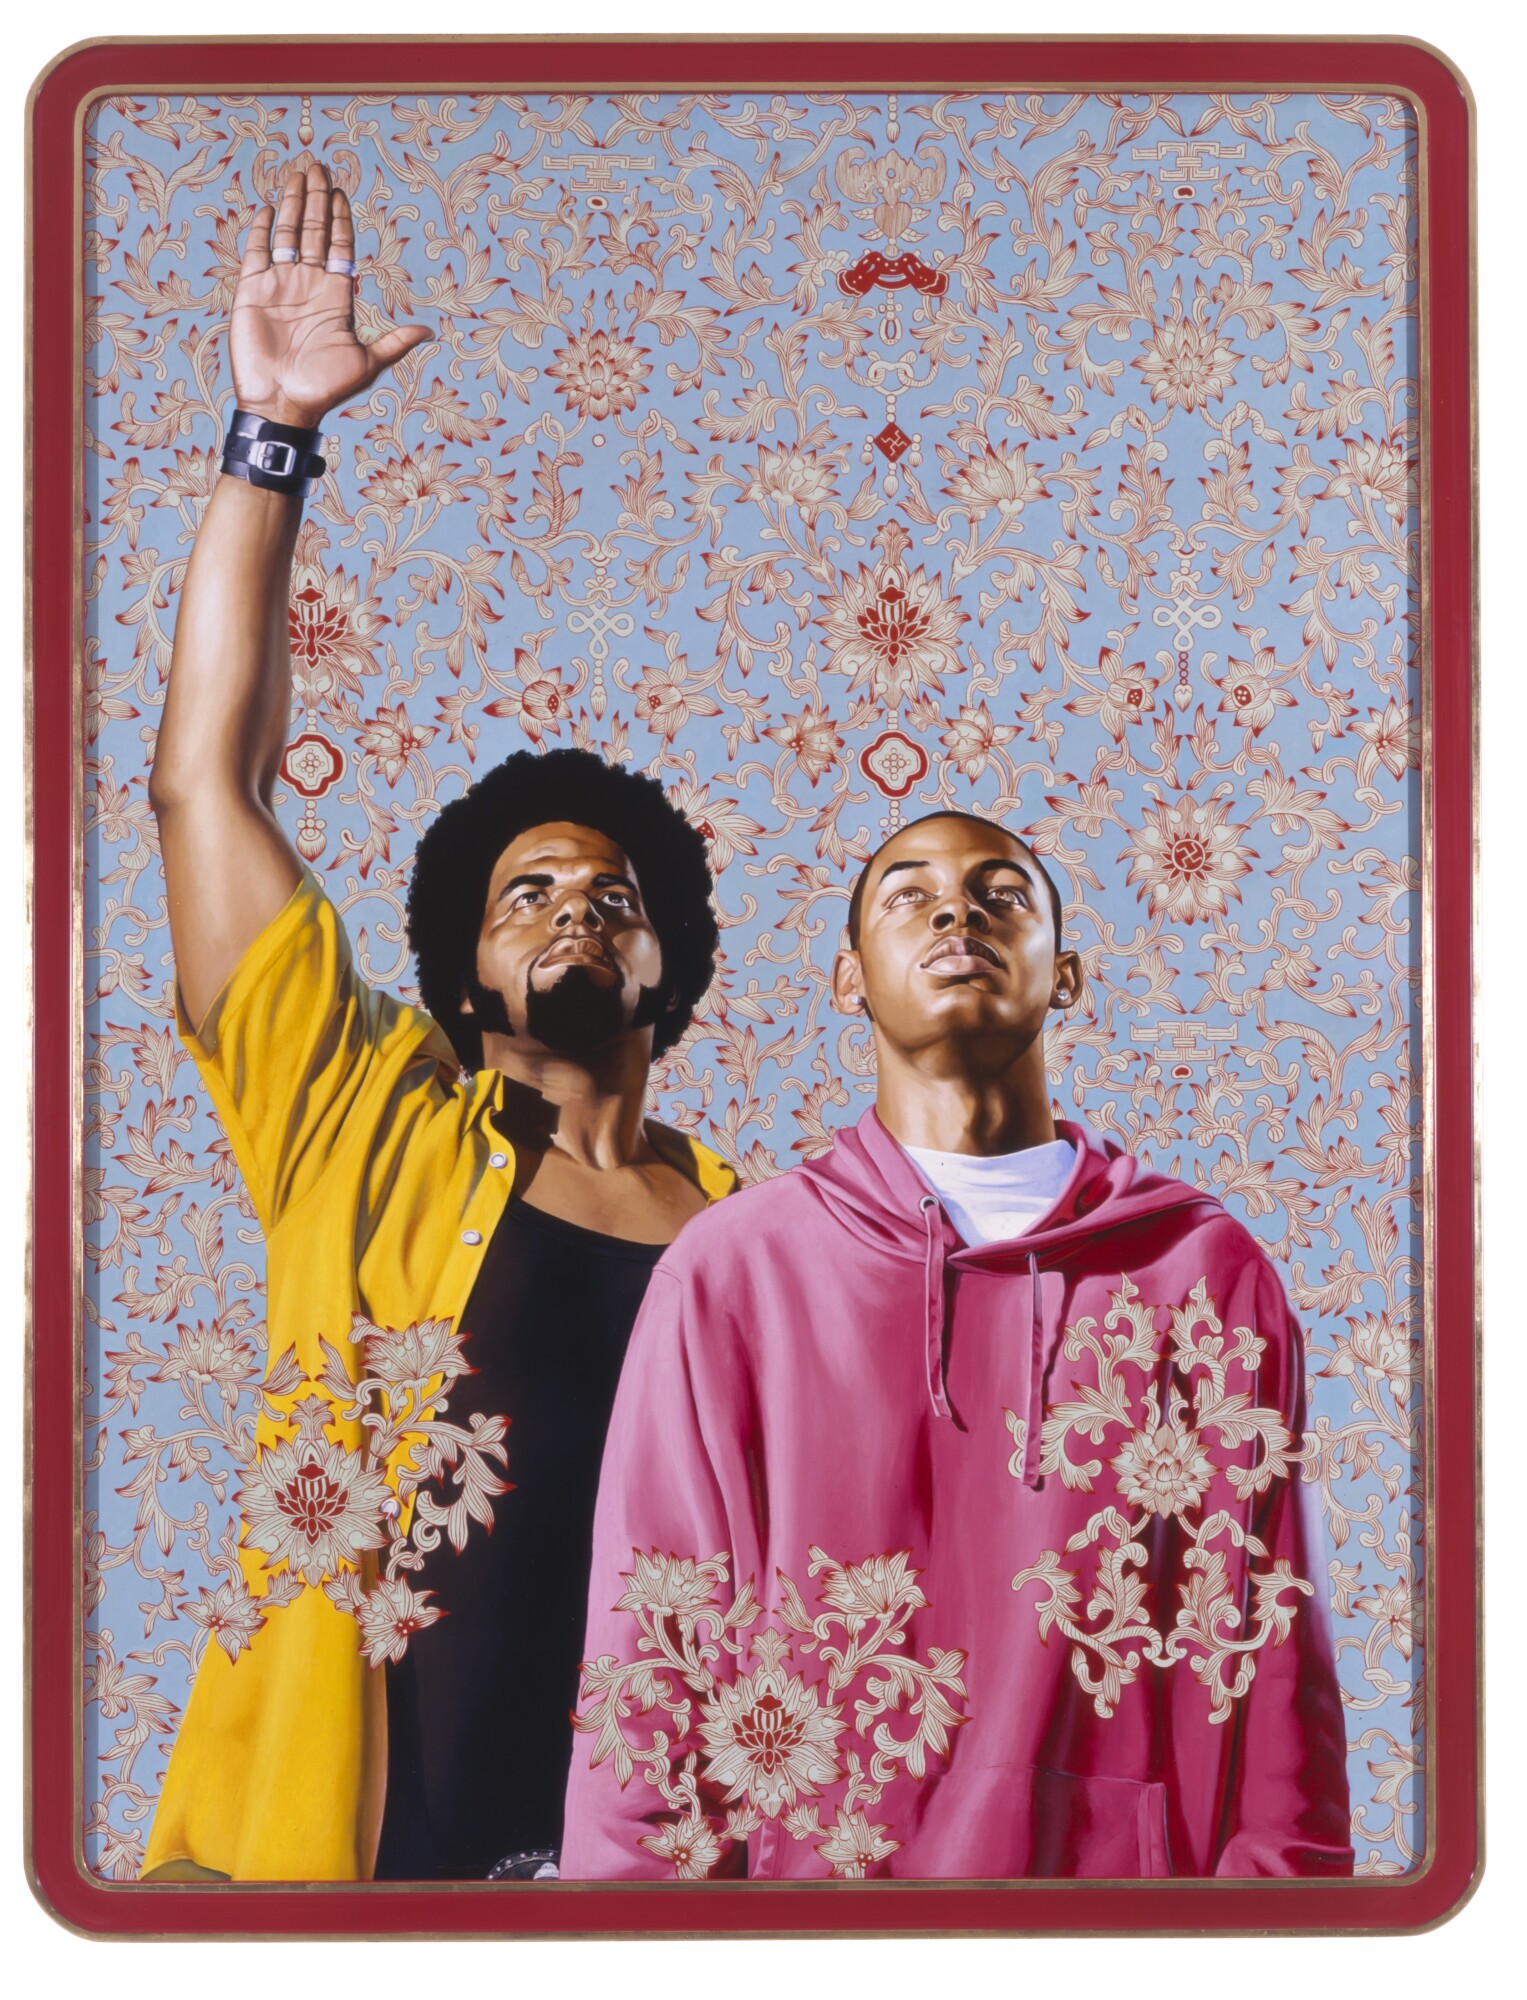 kehindewiley_a new republic_Carry out the Four Modernisations of the Fatherland